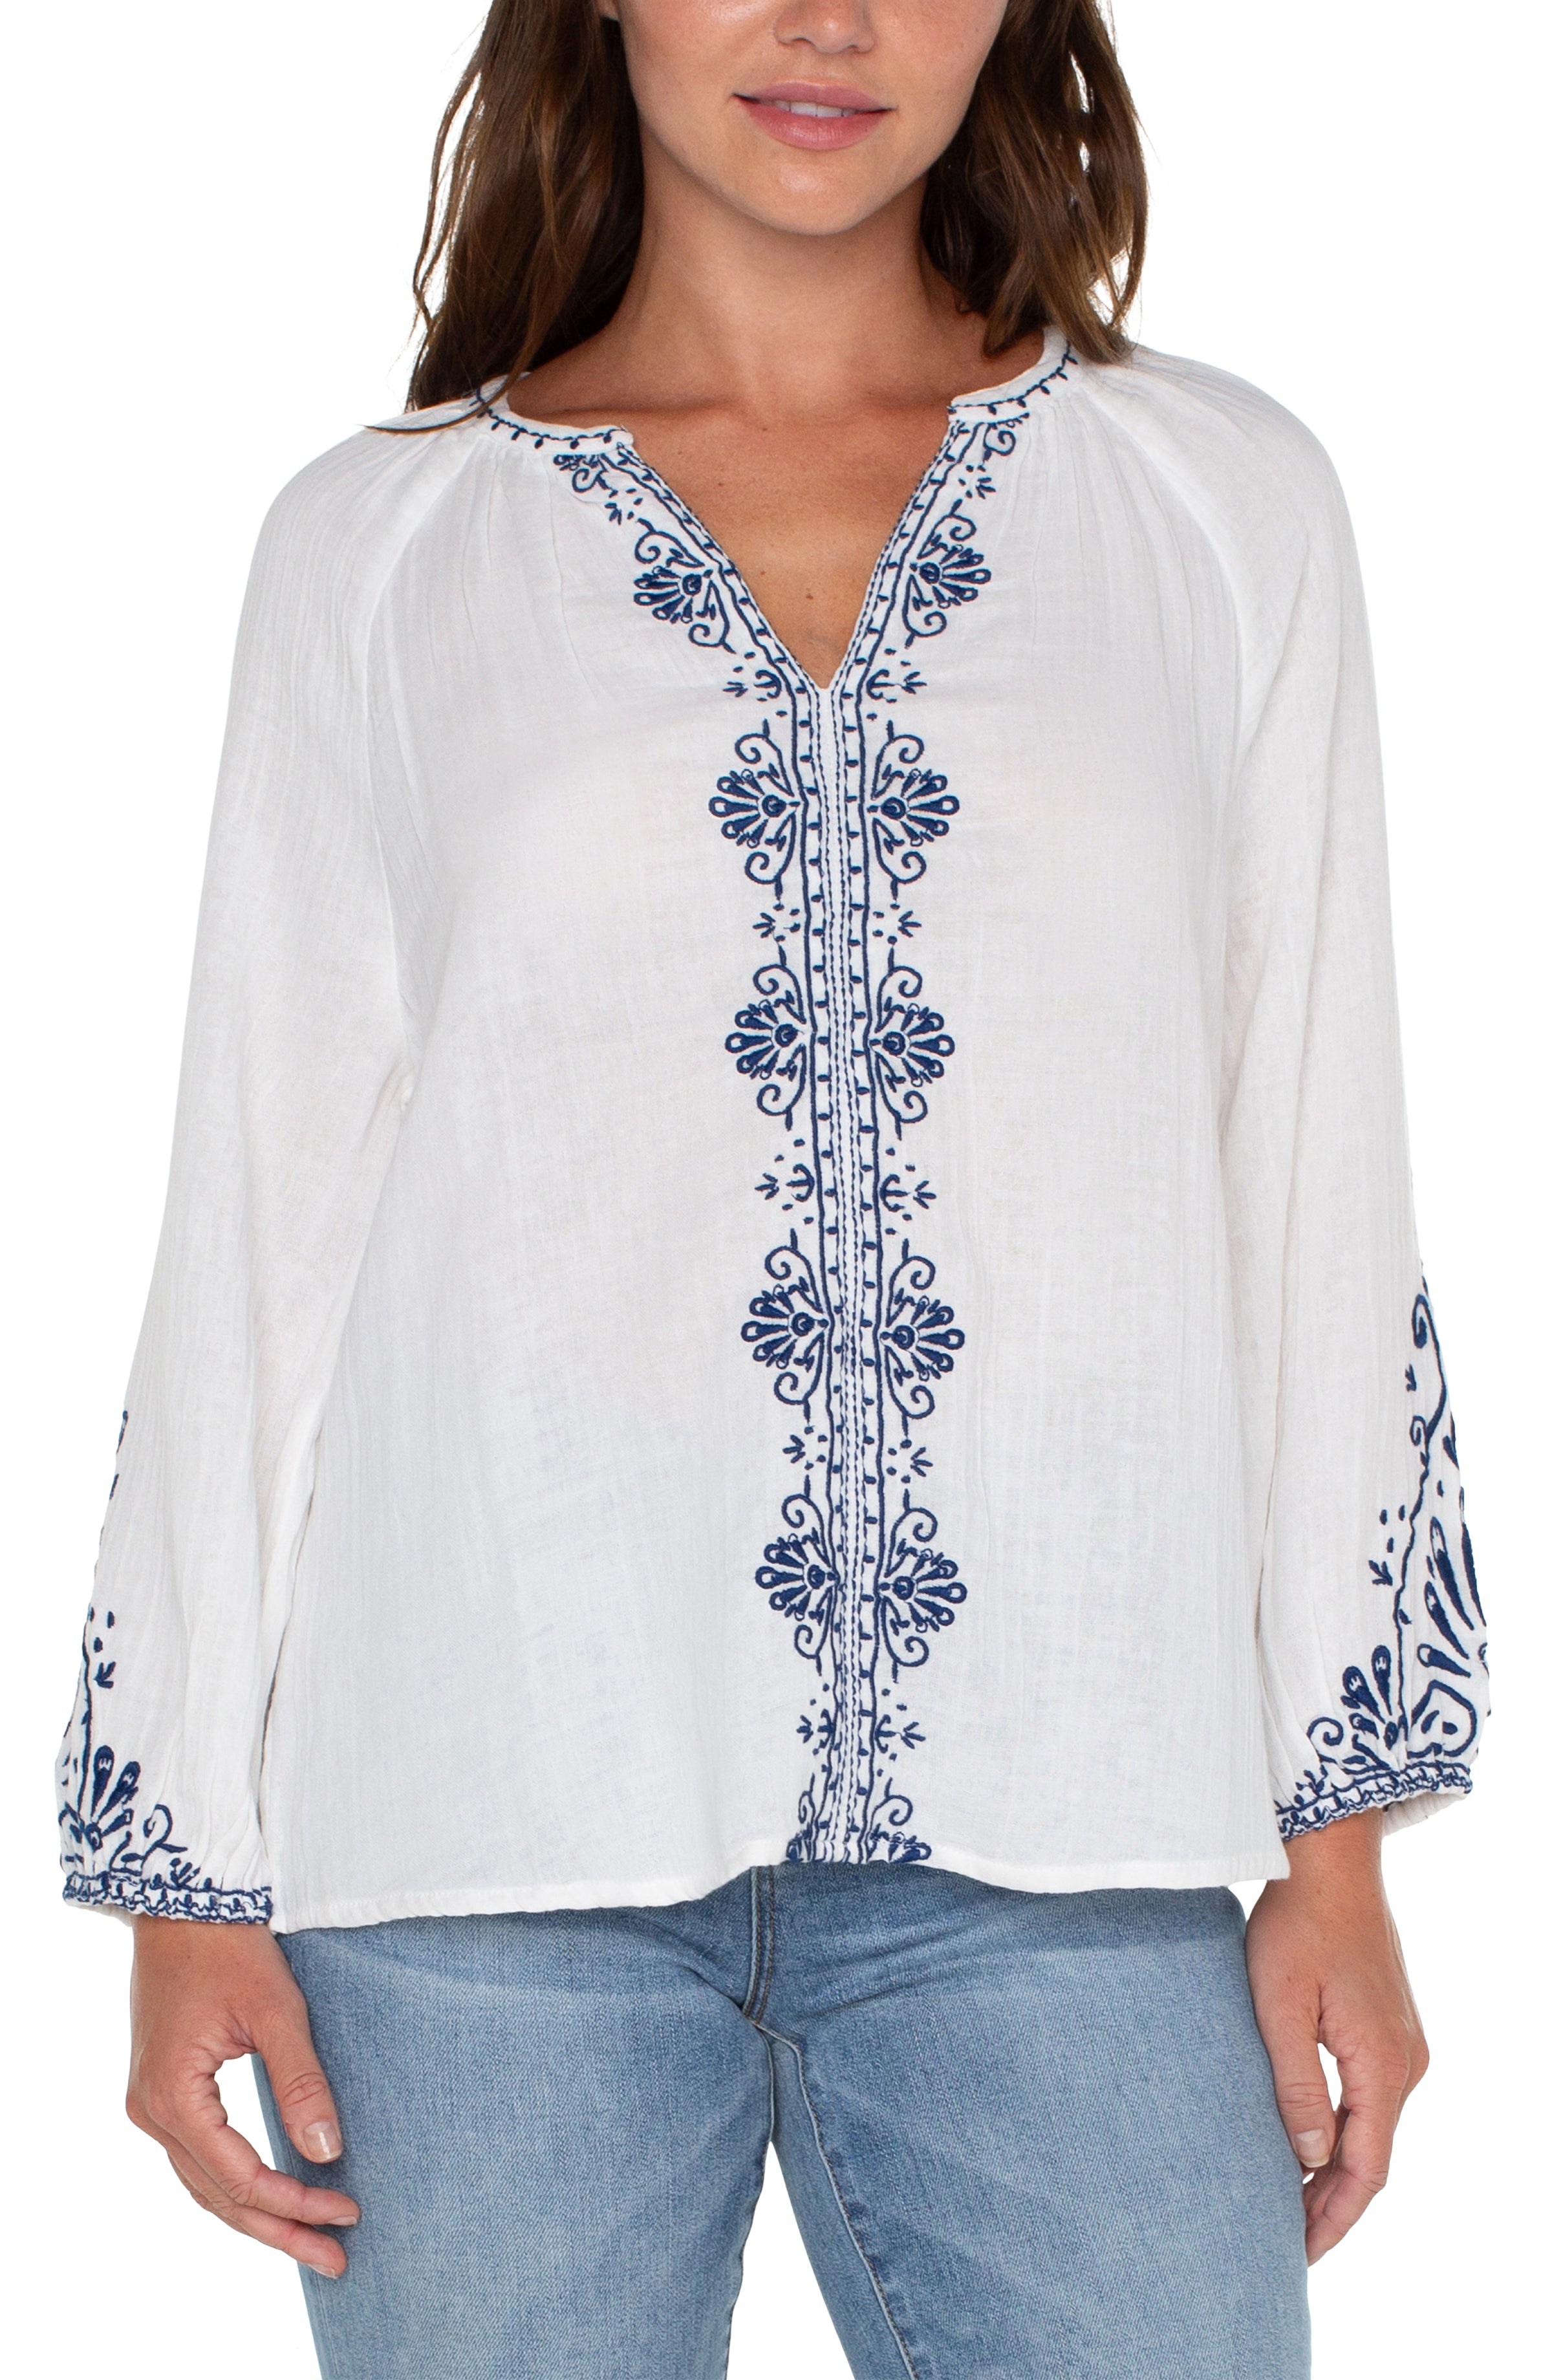 LVP Long Sleeve Embroidered Top - Off White Front View